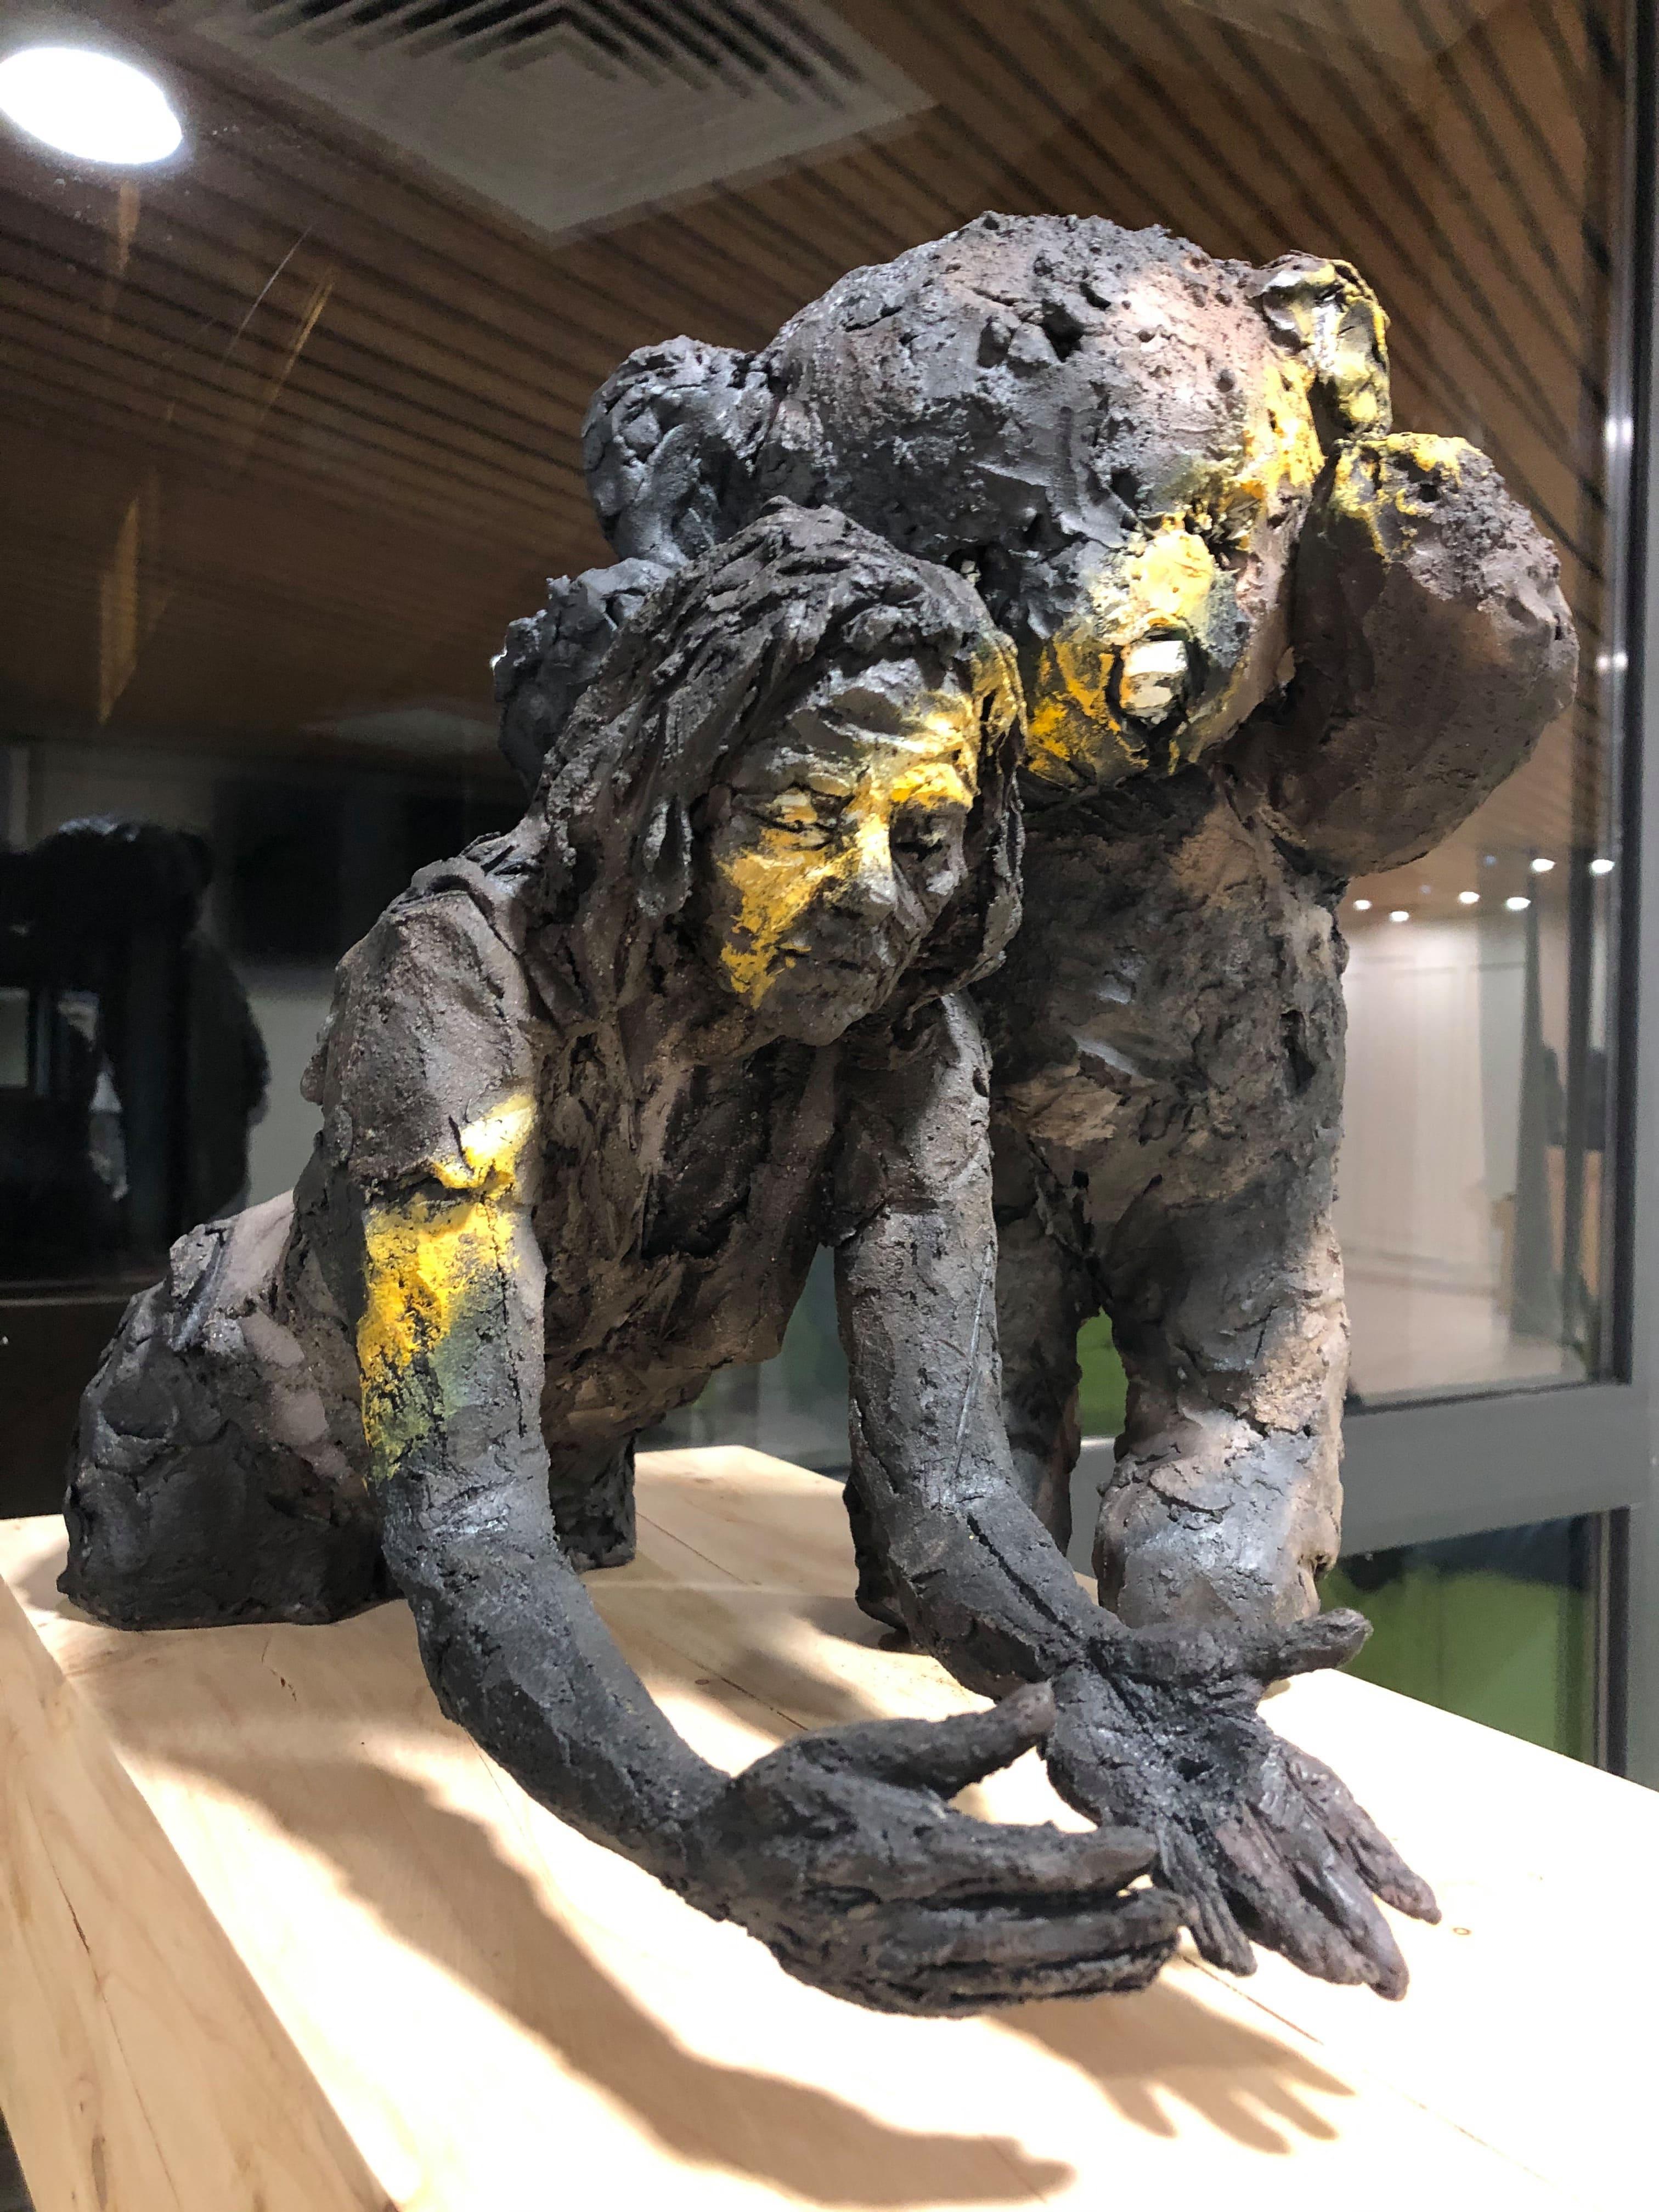 Wait (with Carole), by contemporary French artist Cécile Raynal. 
Smoke-fired stoneware sculpture, pigments, cypress plinth, 155 cm × 36 cm × 60 cm.
Dimensions of the woman : 30 cm H x 20 cm L x 45 cm D
Dimensions of the bear: 39 cm H x 27 cm L x 20